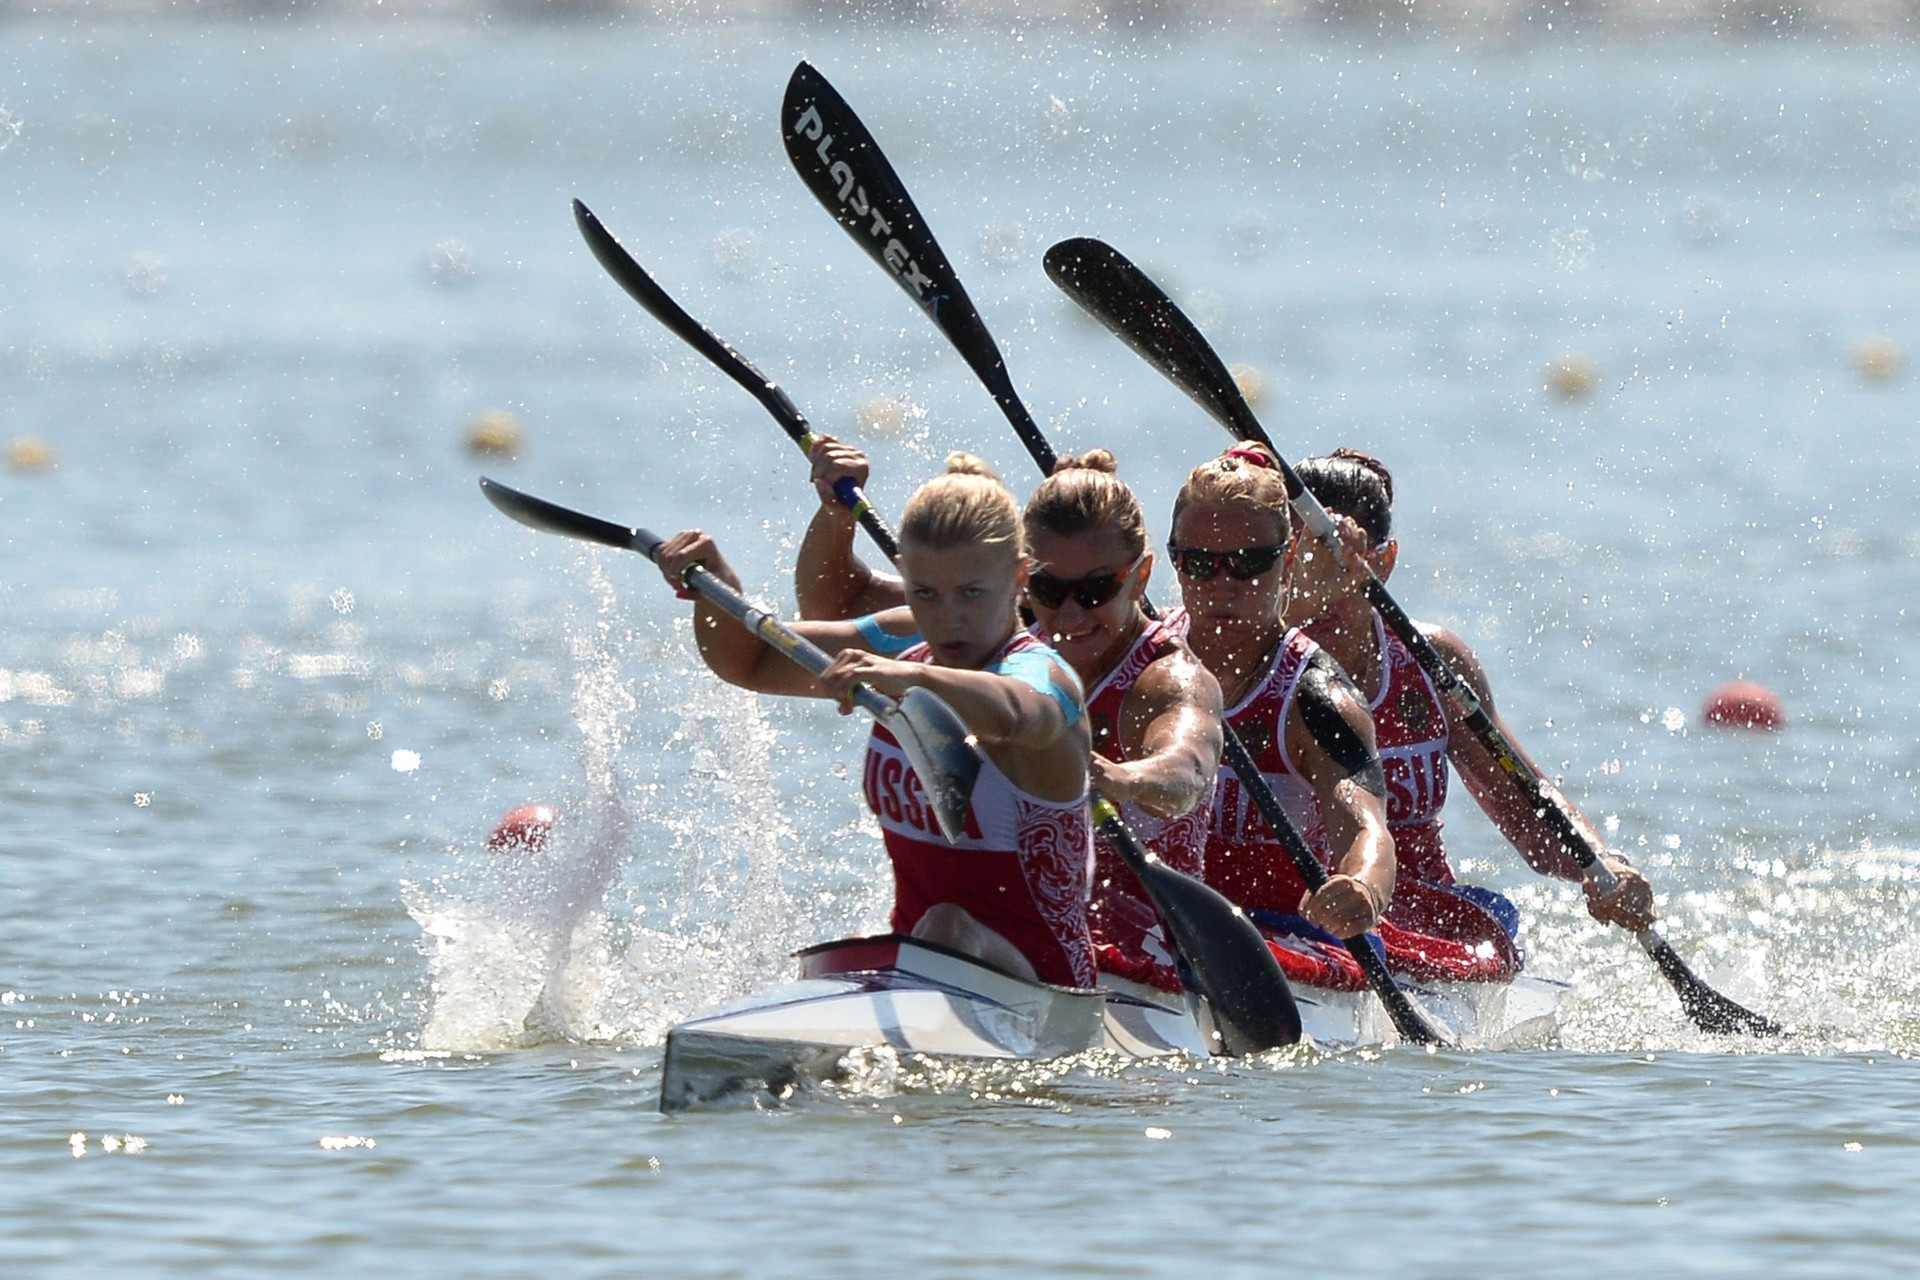 Belarus continues preparations for World University Canoe Sprint Championships